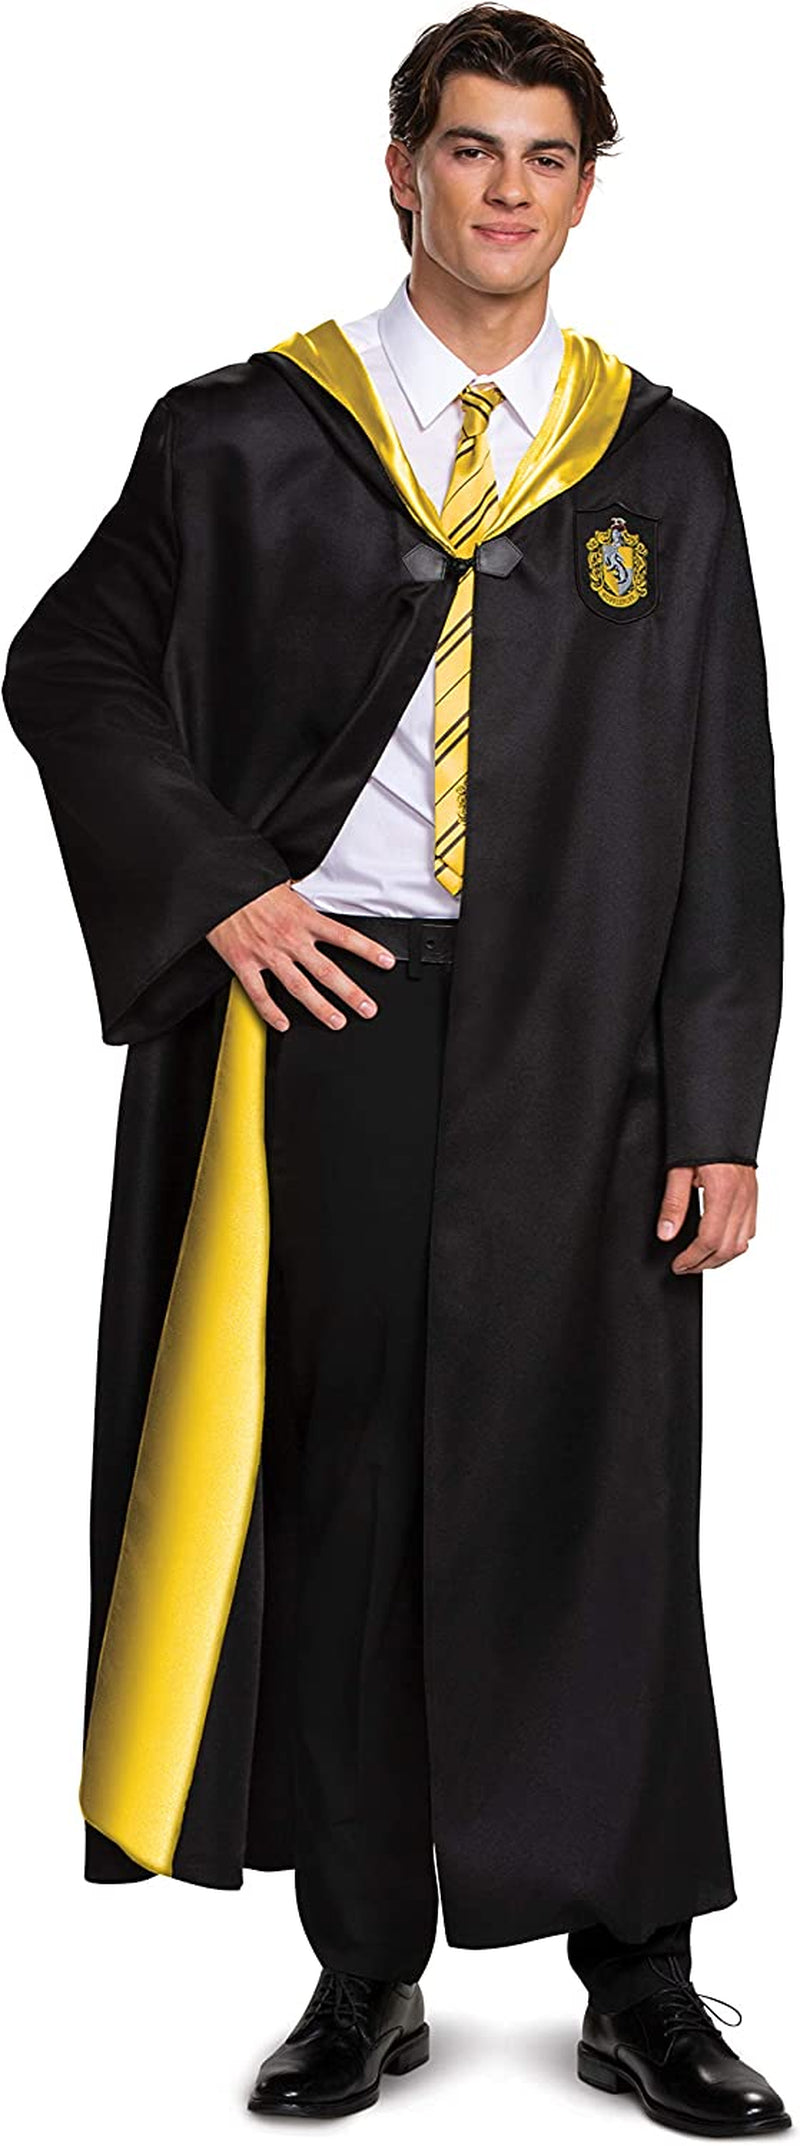 Harry Potter Robe, Deluxe Wizarding World Hogwarts House Themed Robes for Adults, Movie Quality Dress up Costume Accessory  Disguise Hufflepuff Teen Xl (14-16) 